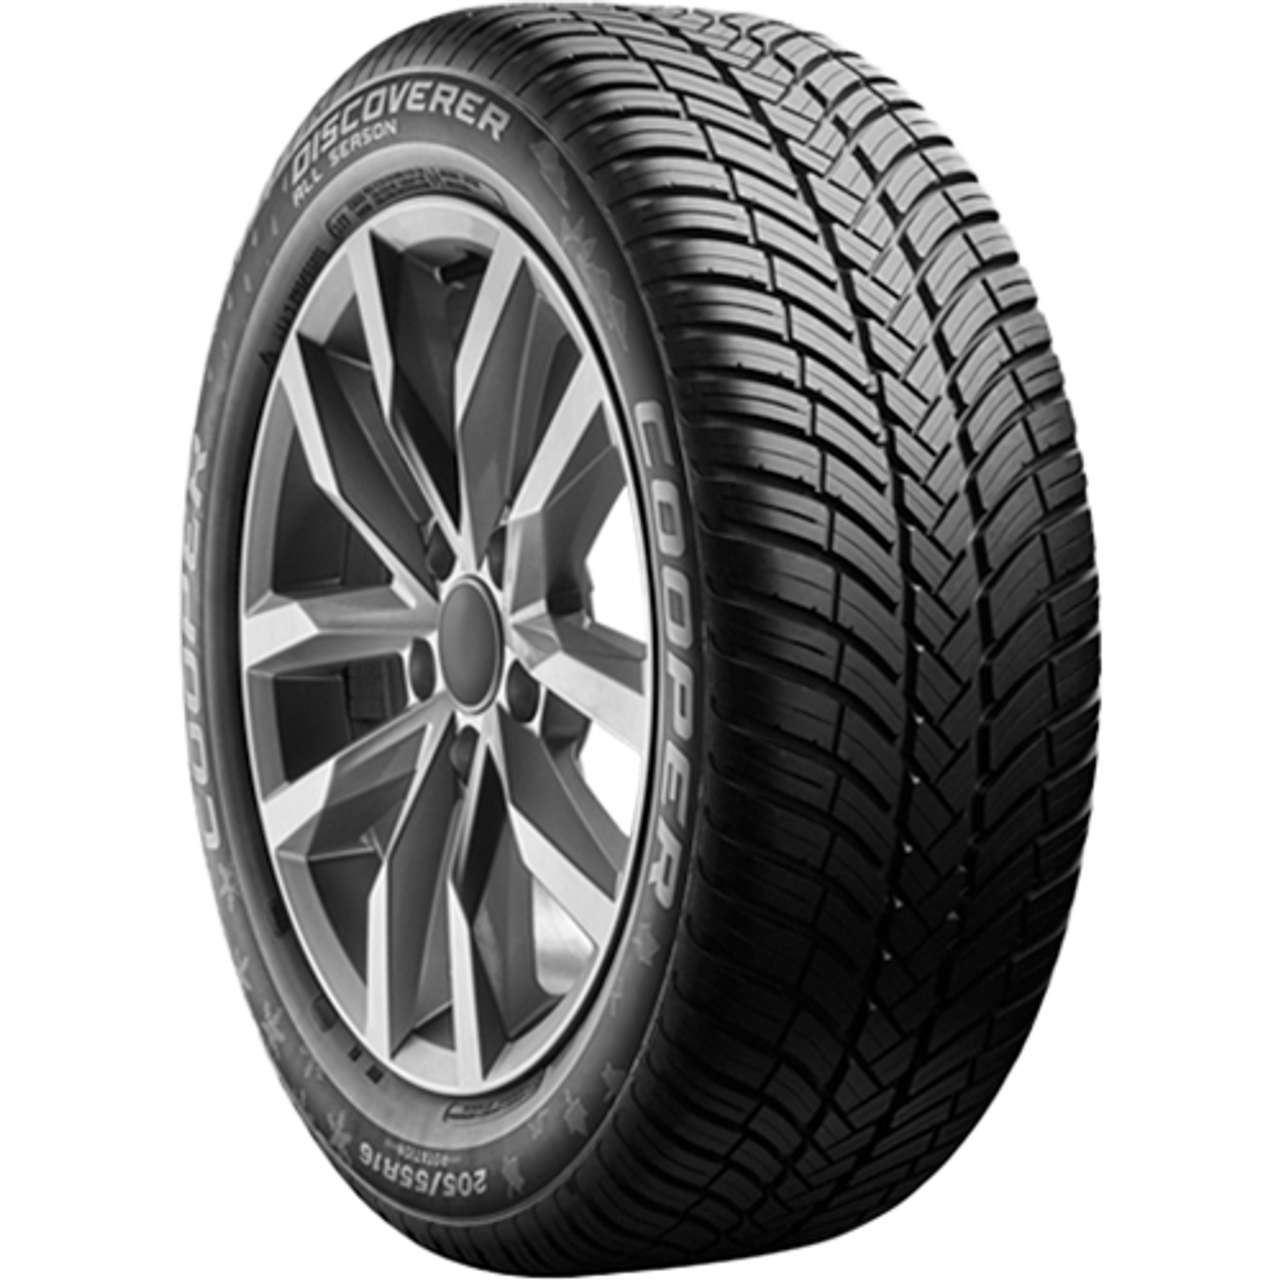 COOPER DISCOVERER ALL SEASON 215/60R17 100H BSW XL